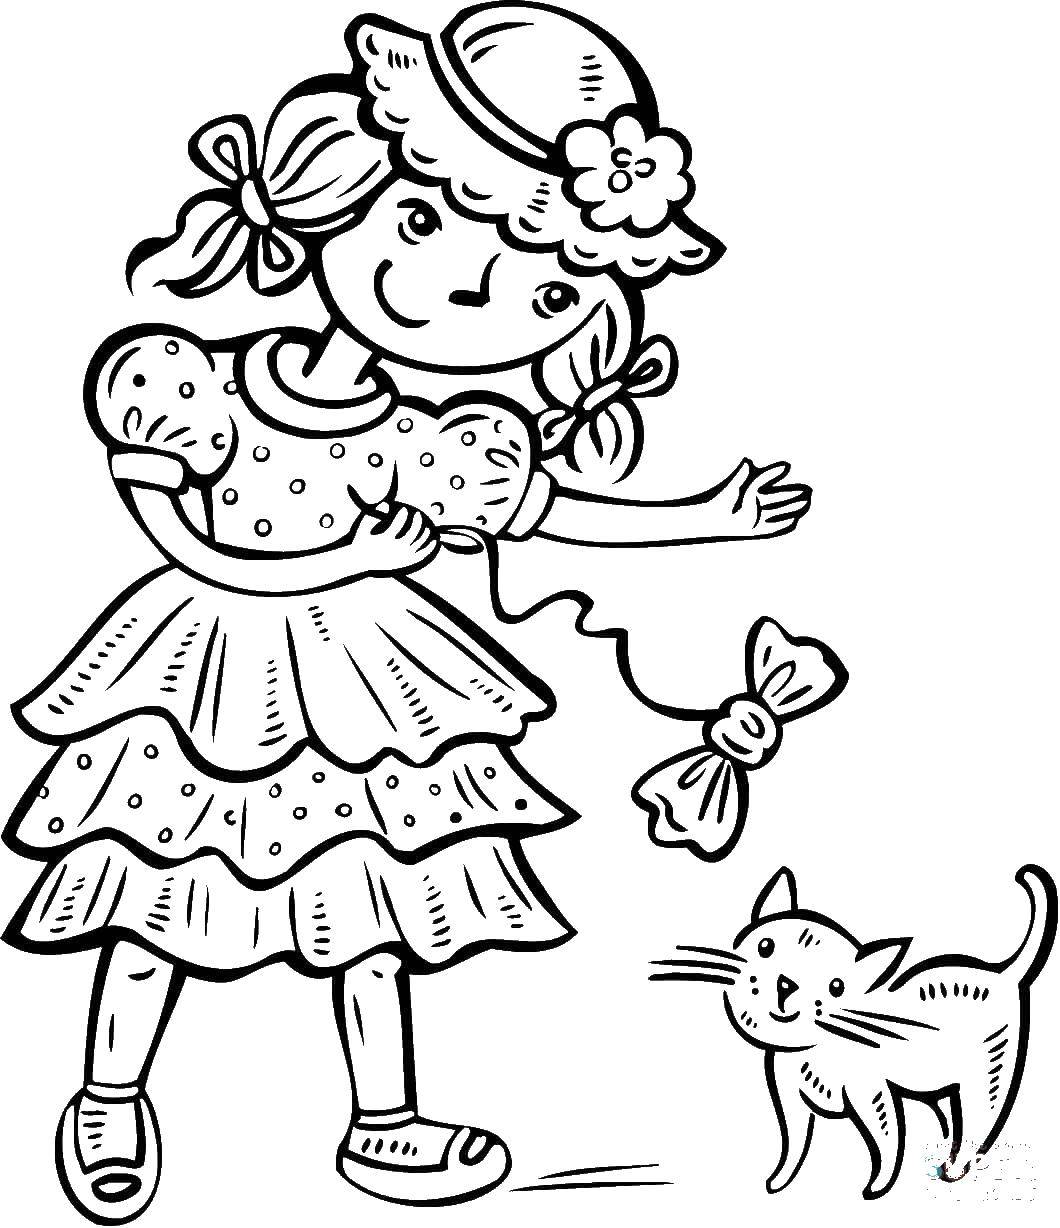 Coloring Girl playing with a kitten. Category Cats and kittens. Tags:  Animals, kitten.